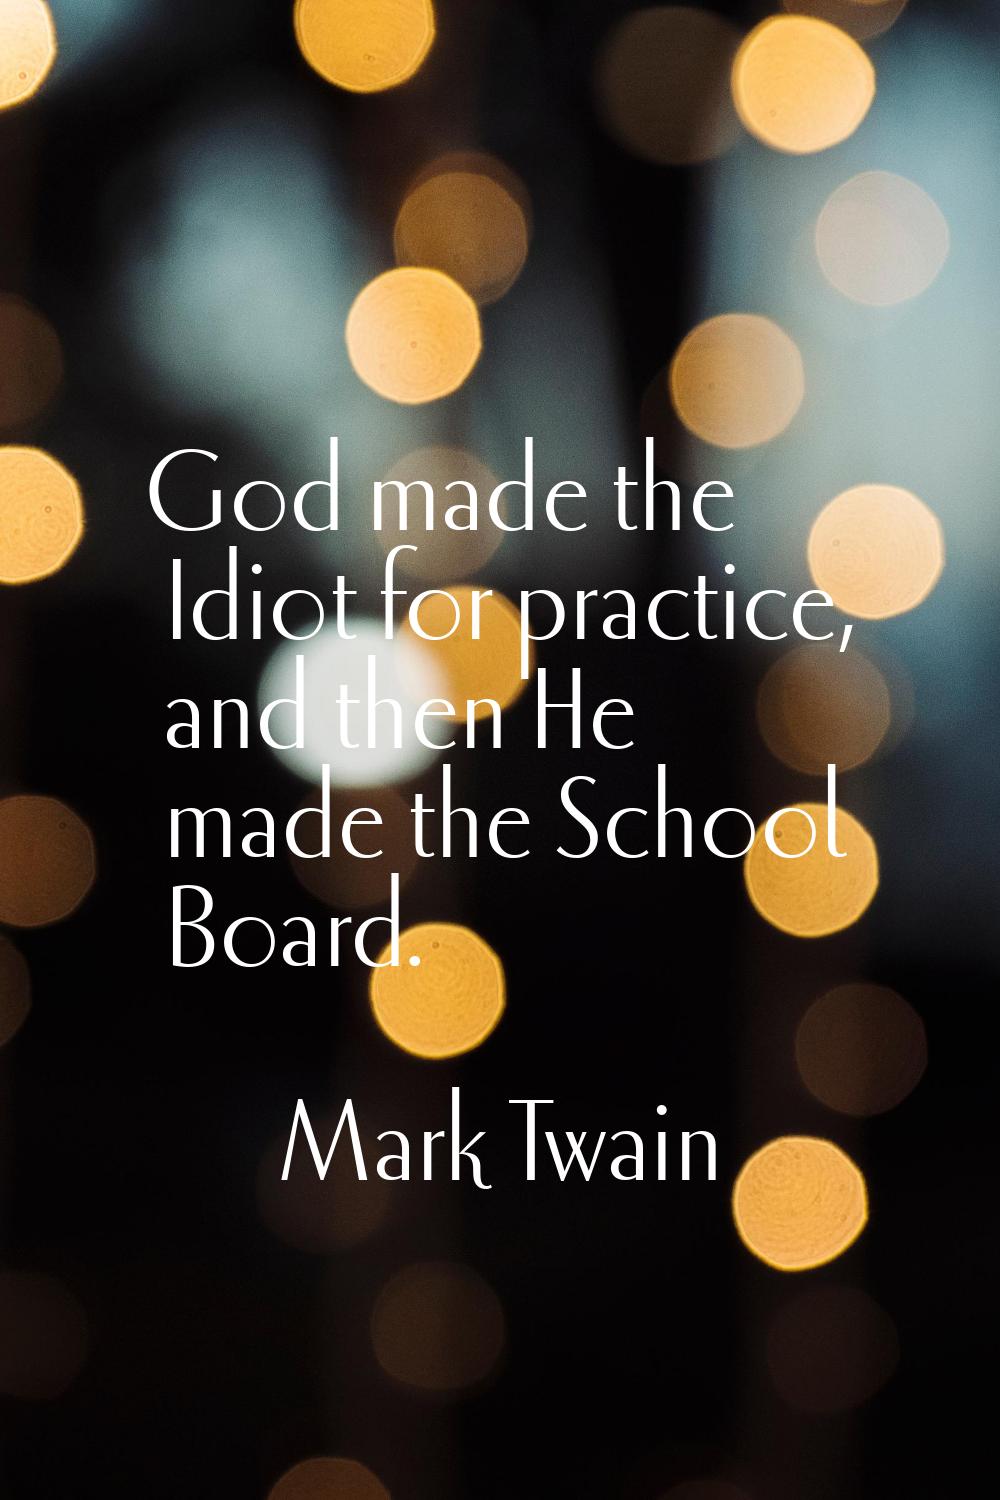 God made the Idiot for practice, and then He made the School Board.